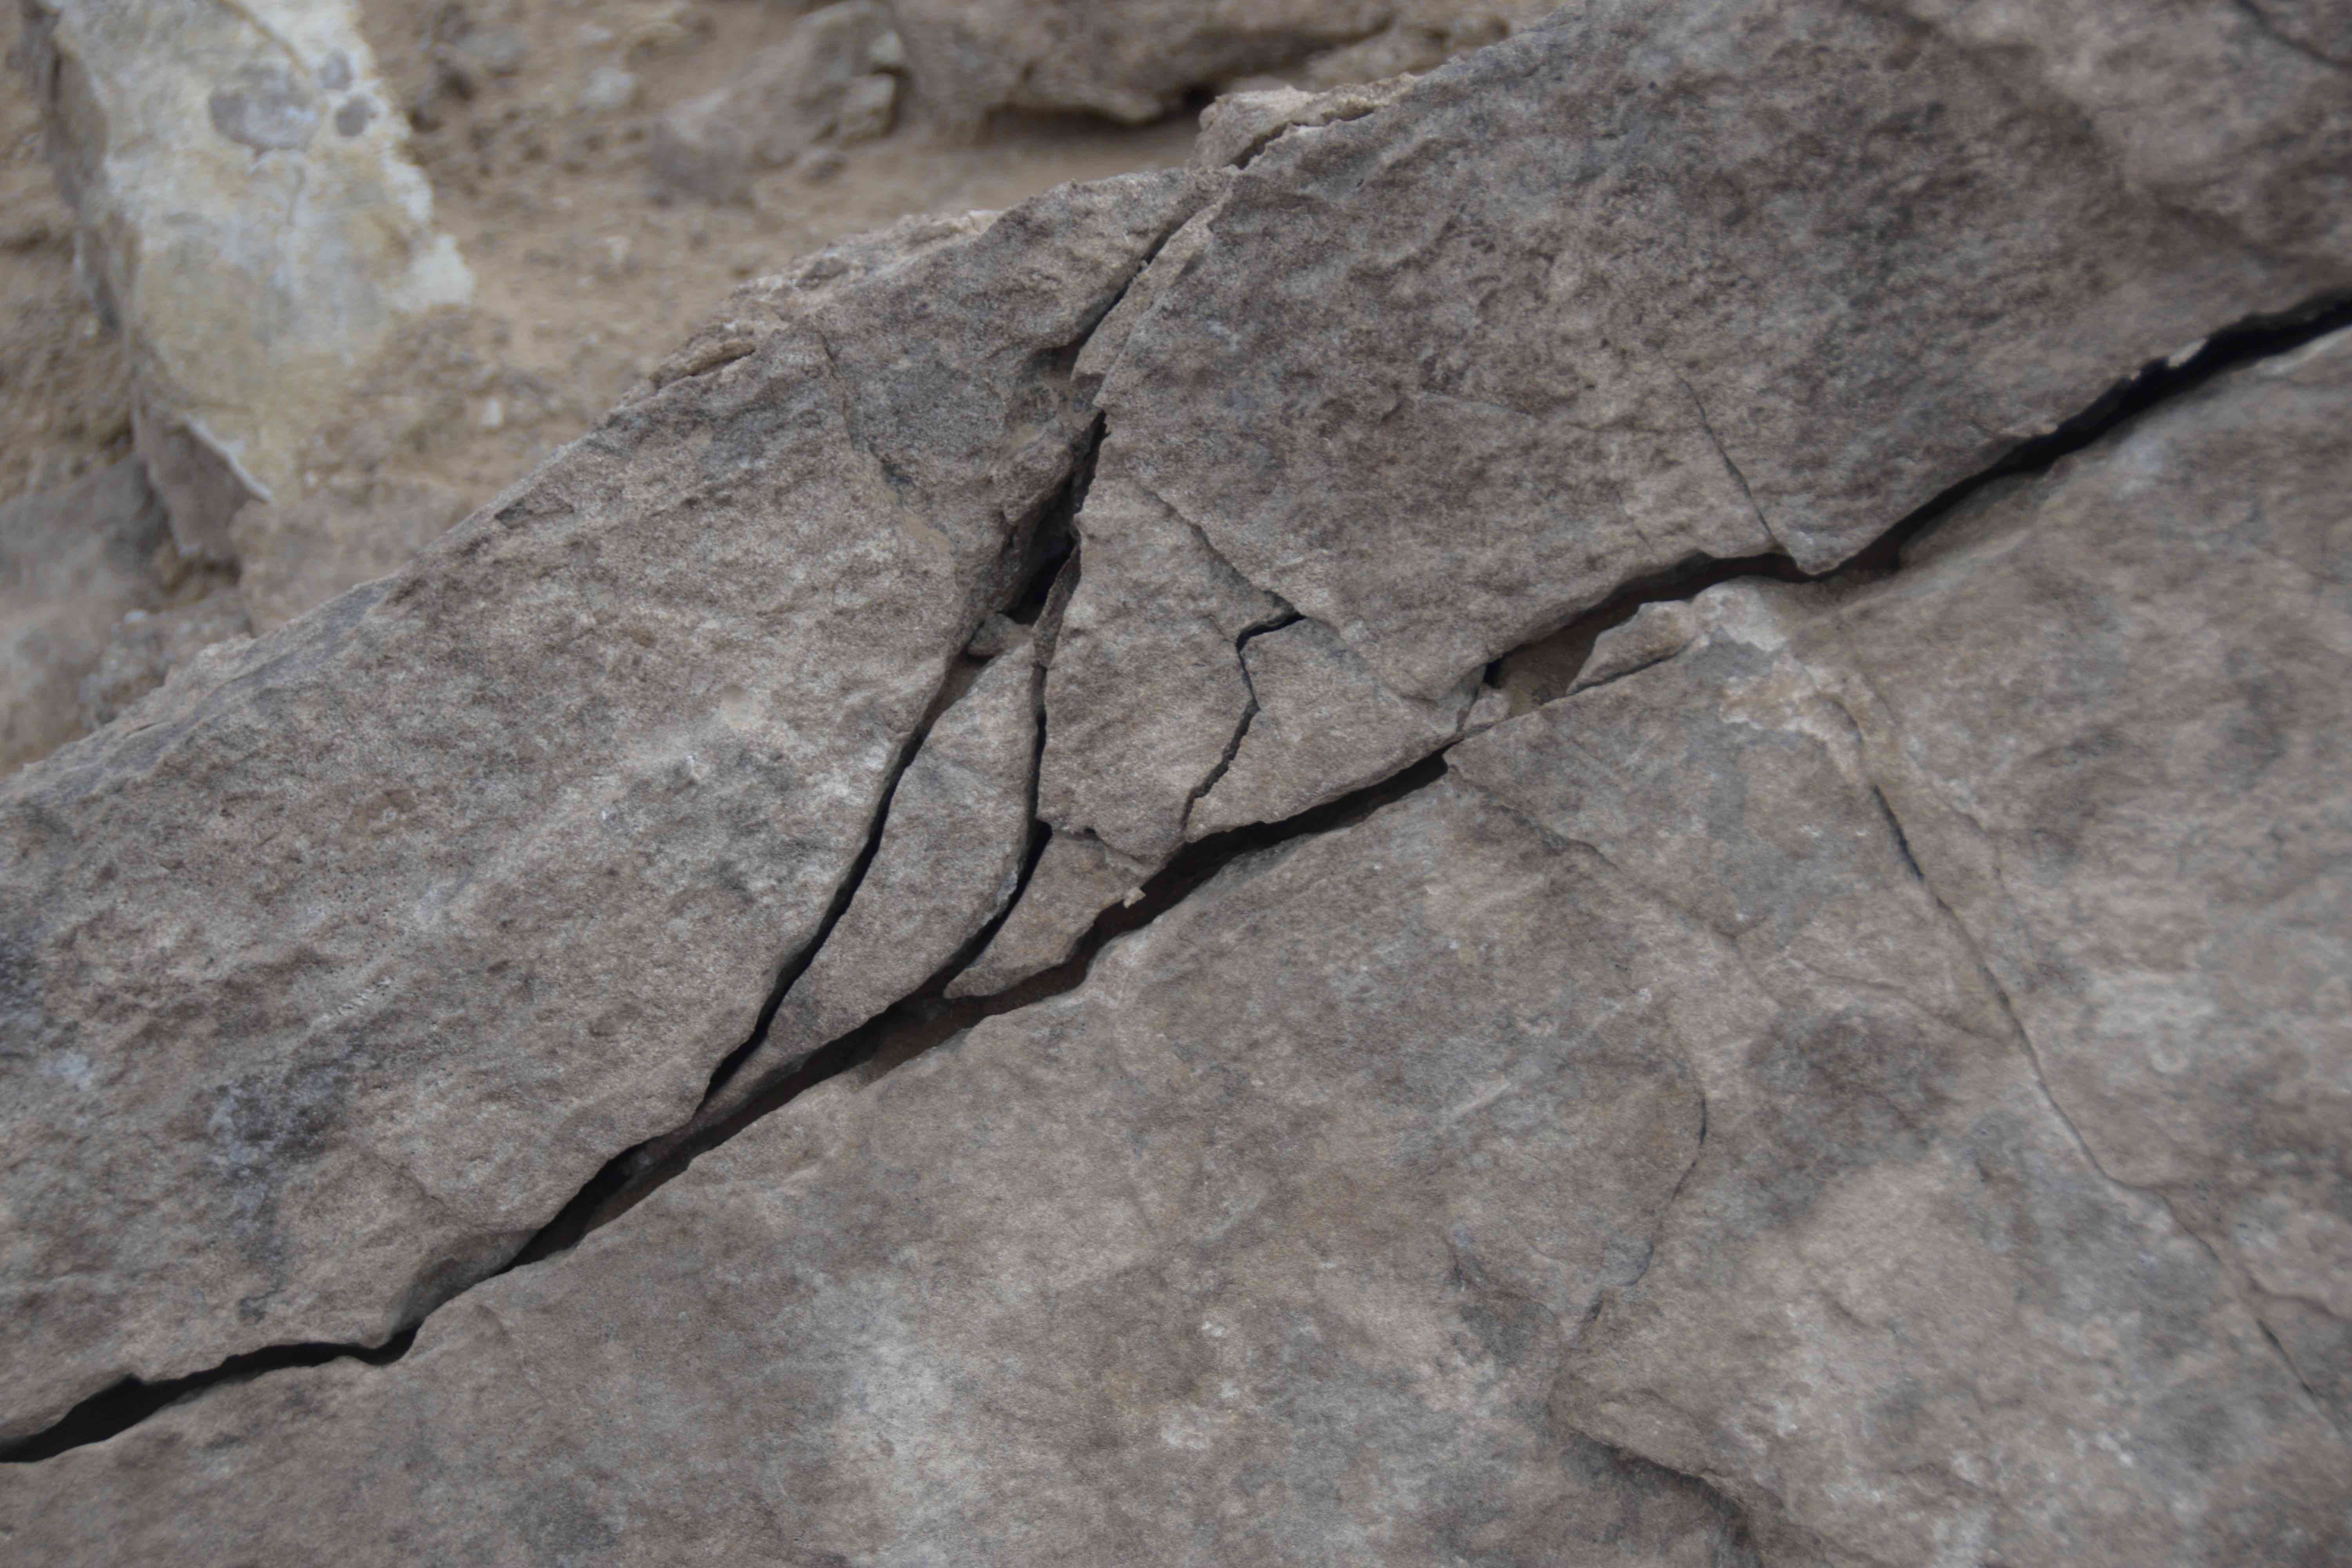 A close-up of dry, cracked Arctic tundra.